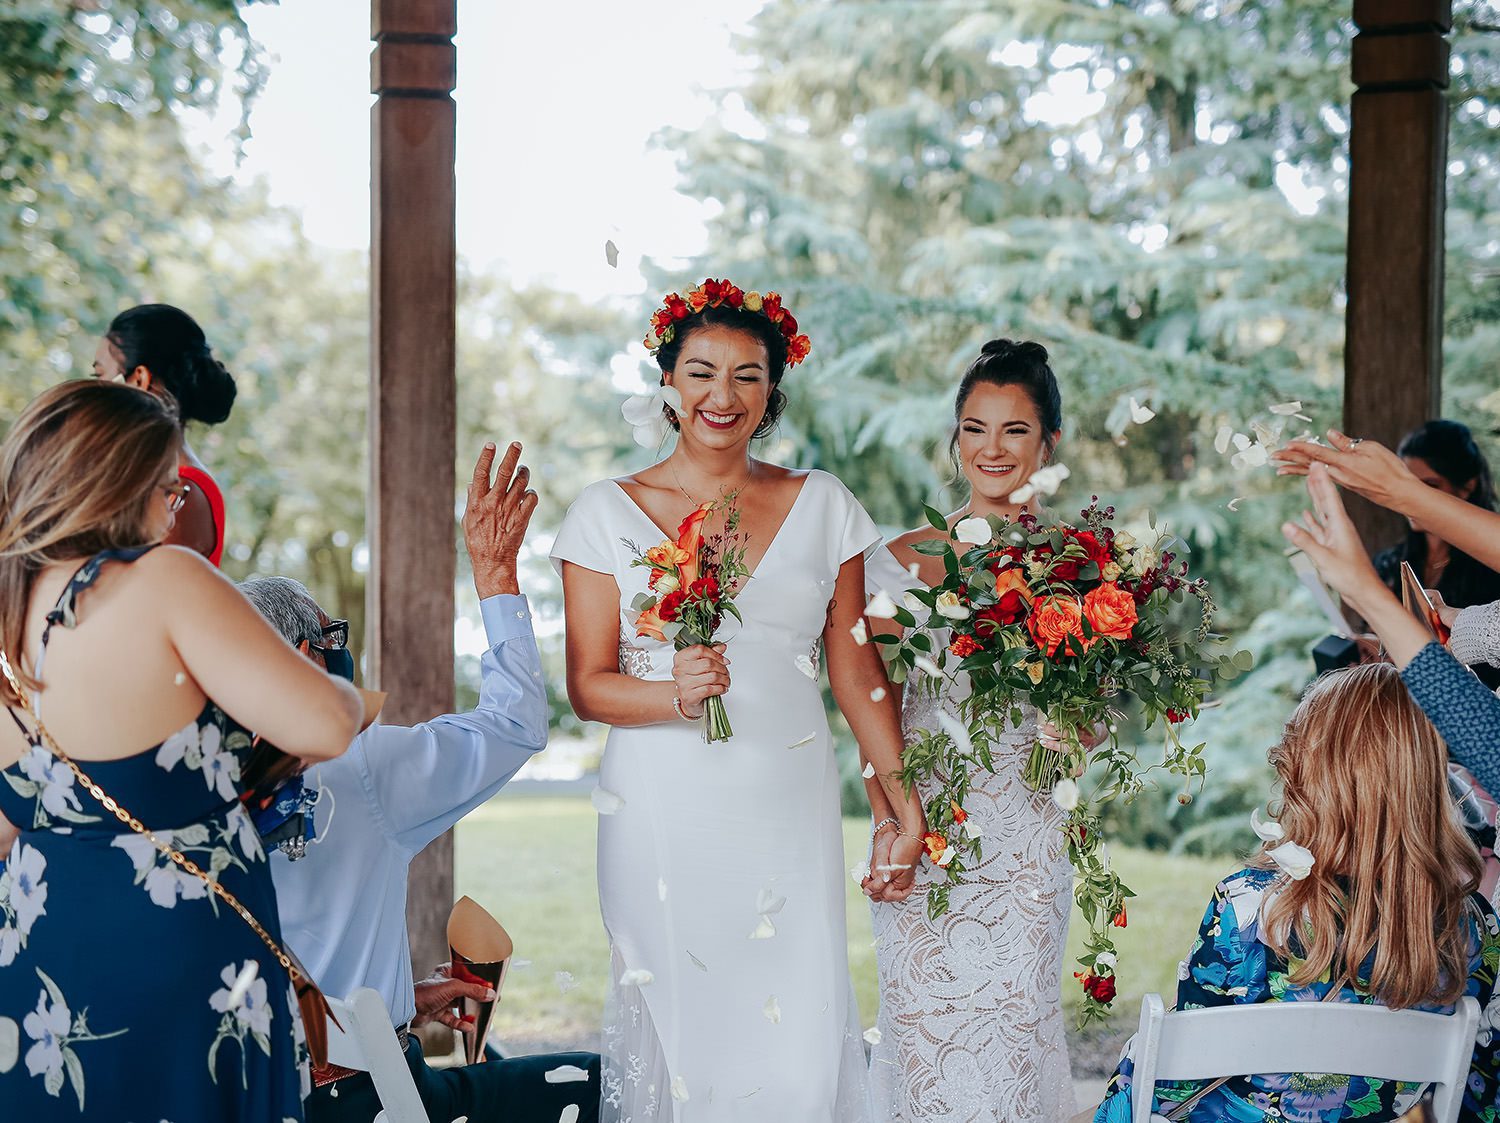 Best Texas queer wedding and engagement photographers